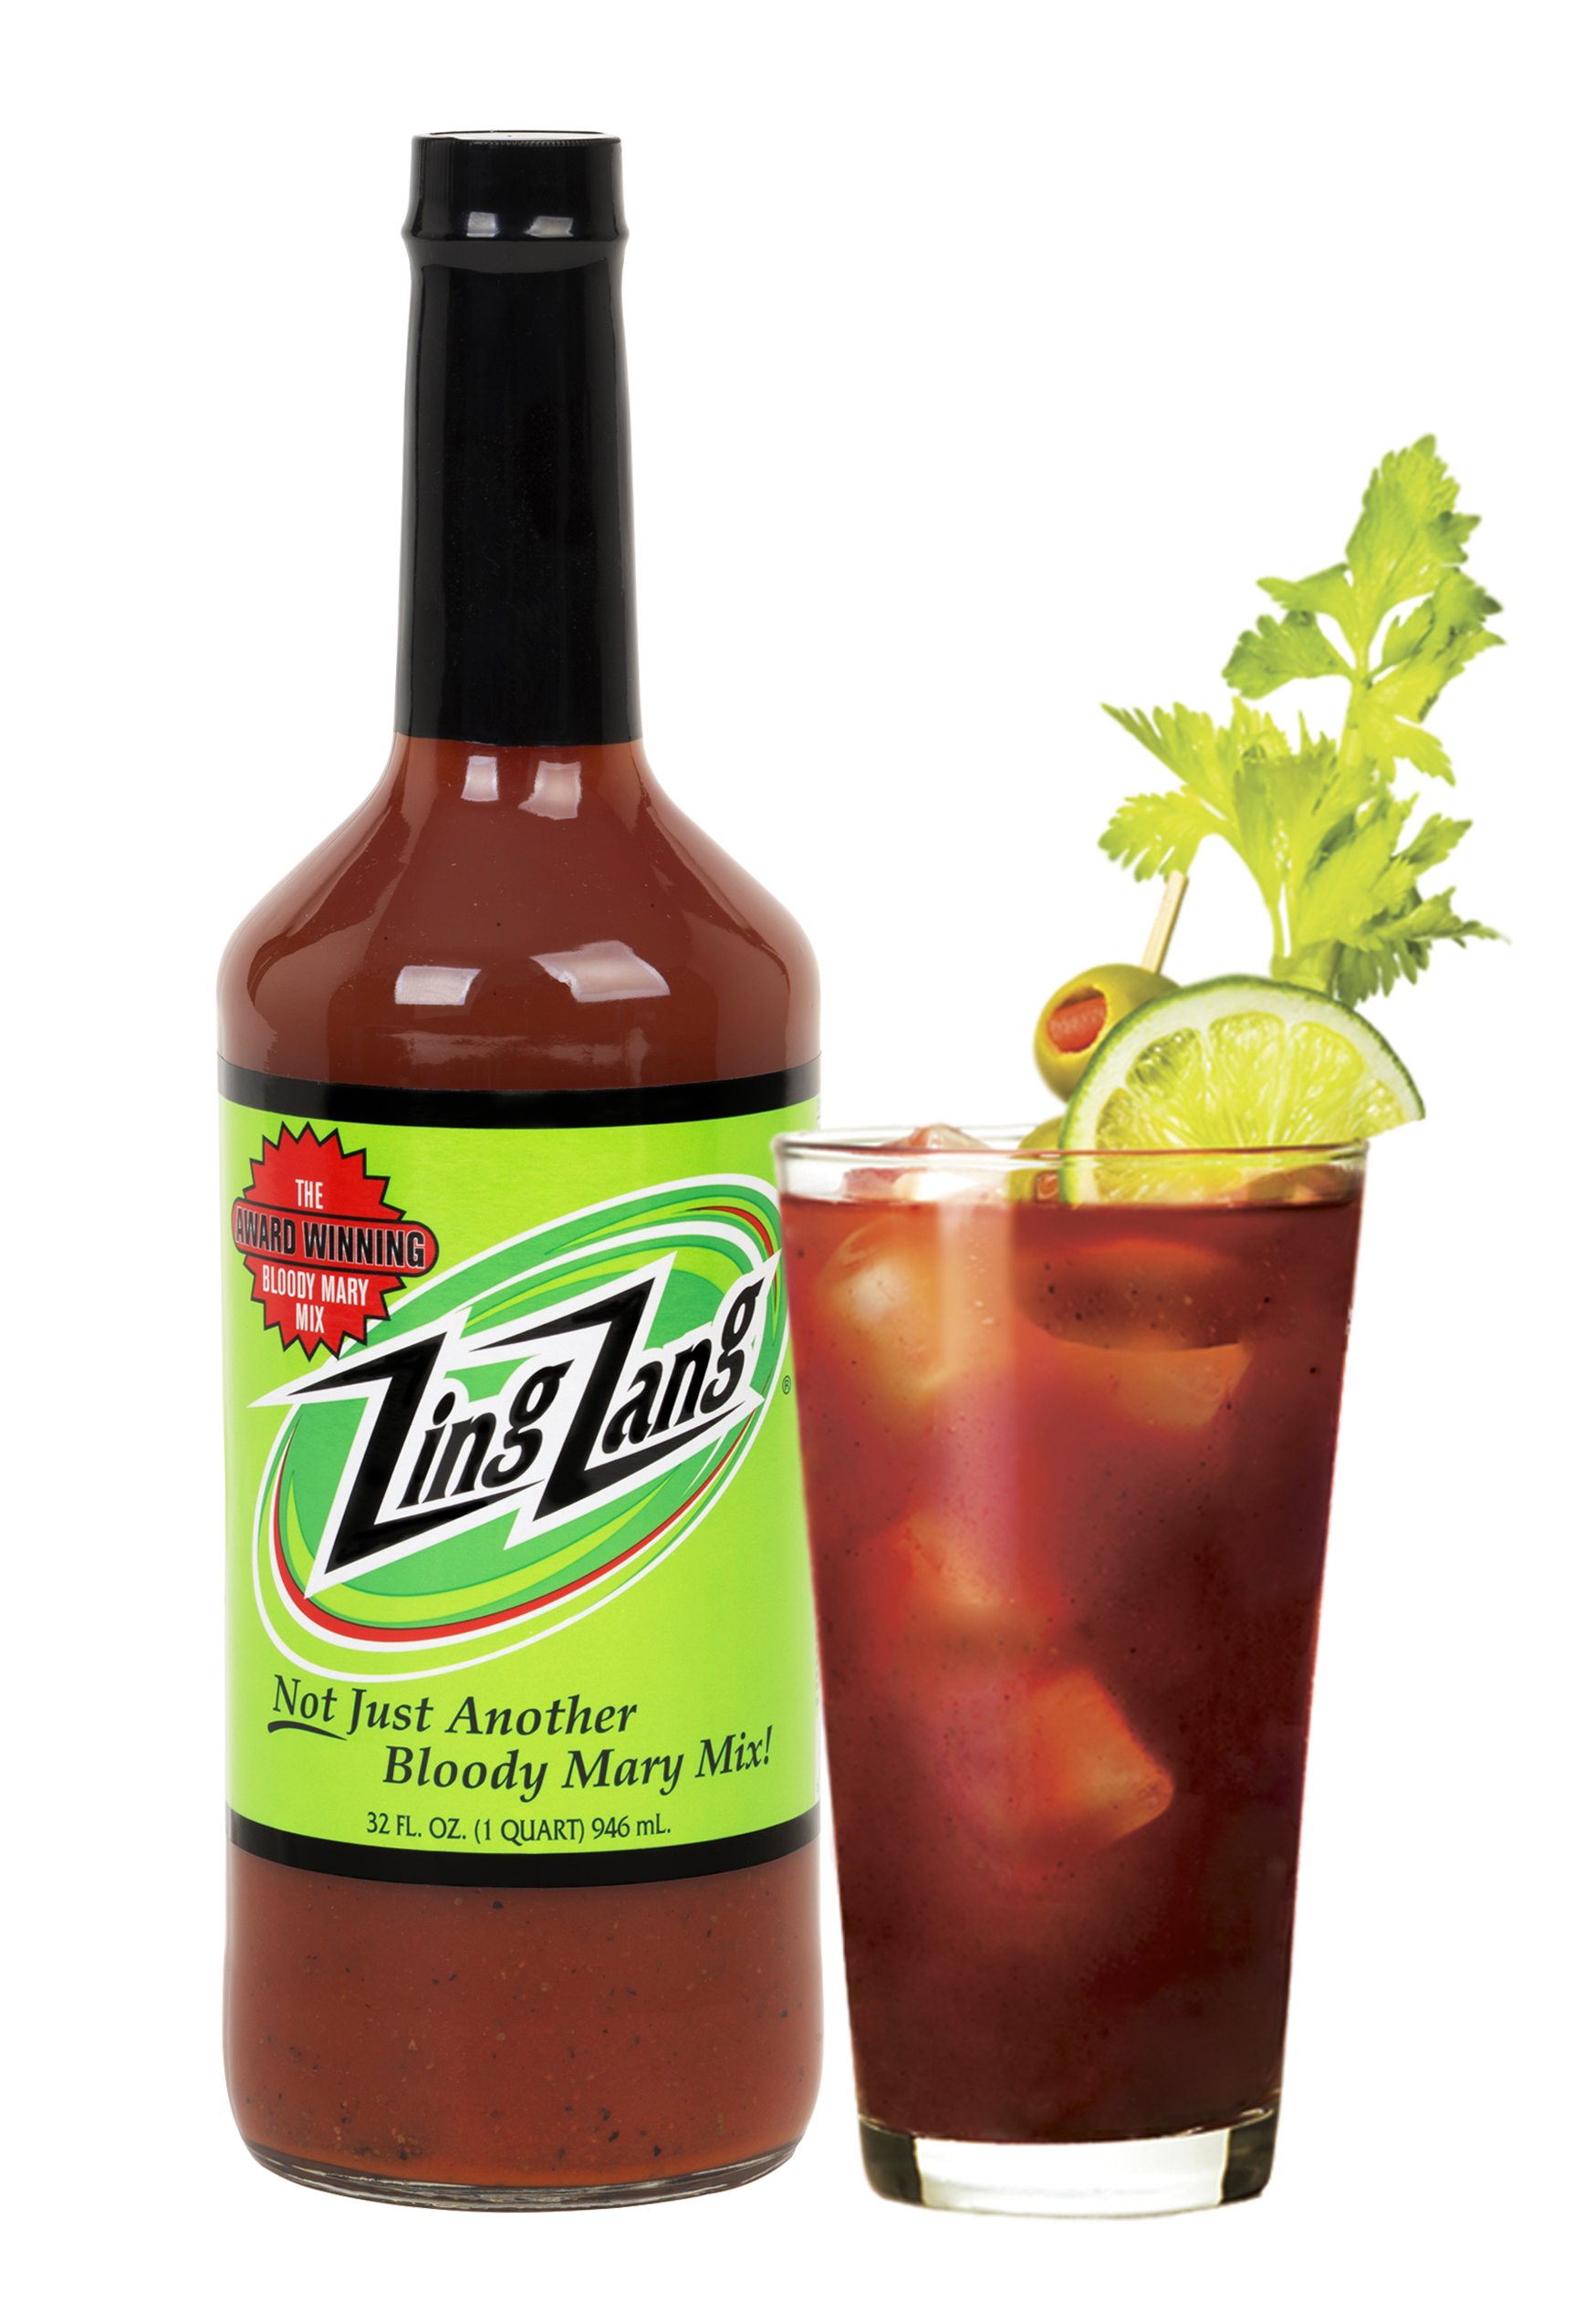 The pride of Zing Zang! Our original product, the award-winning Bloody Mary Mix. Low in sodium and calories, tastes great with or without your favorite vodka.